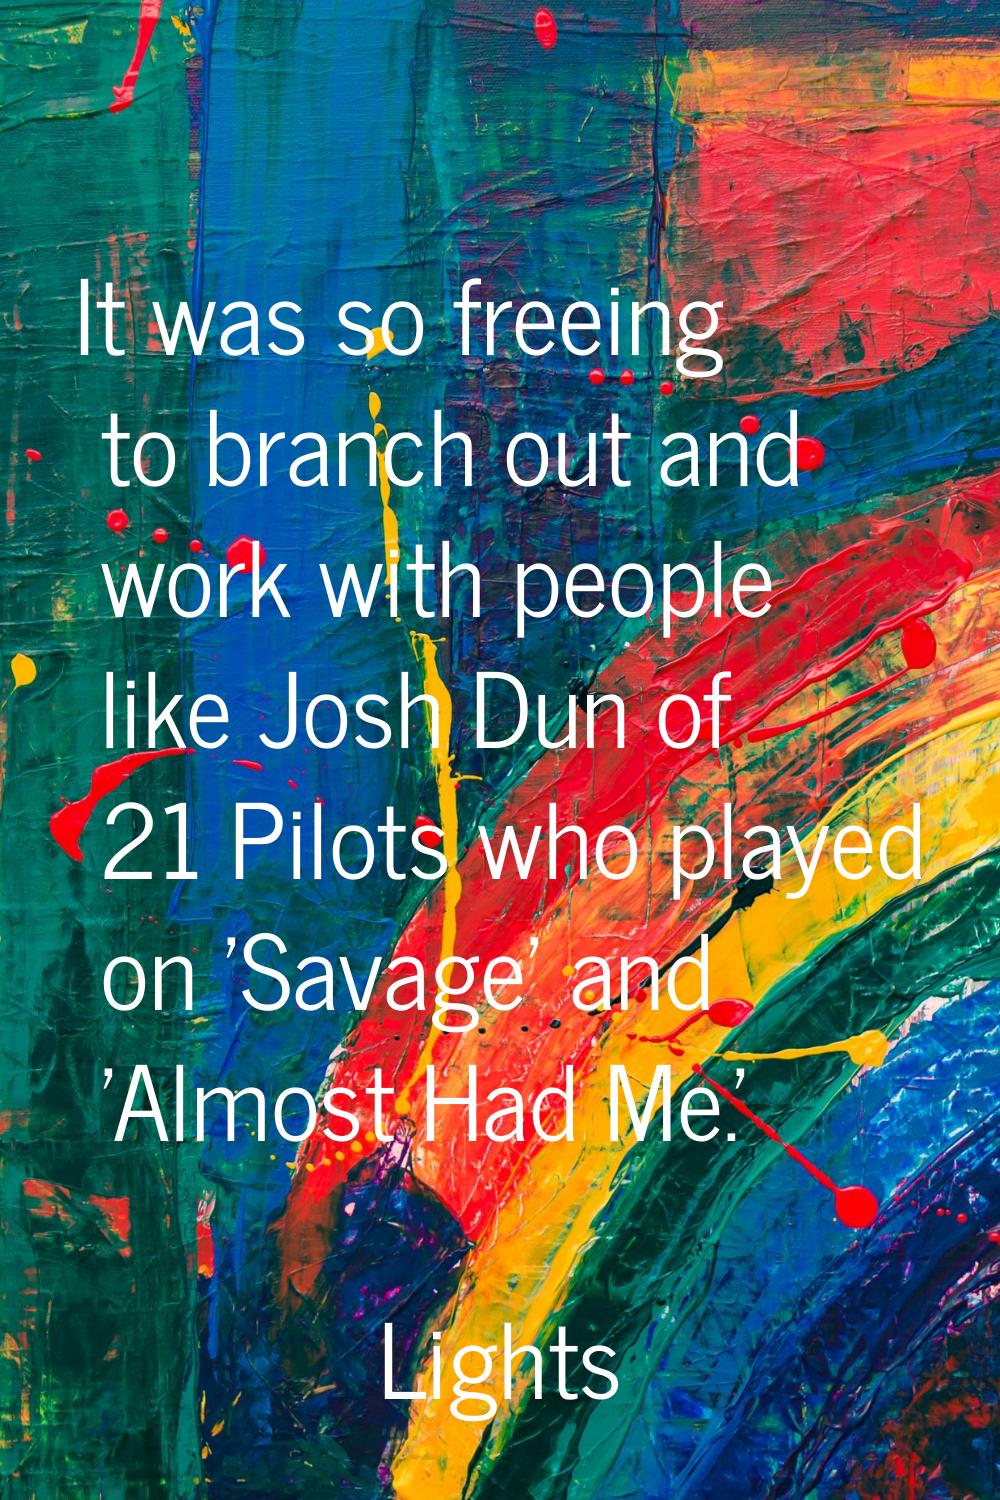 It was so freeing to branch out and work with people like Josh Dun of 21 Pilots who played on 'Sava